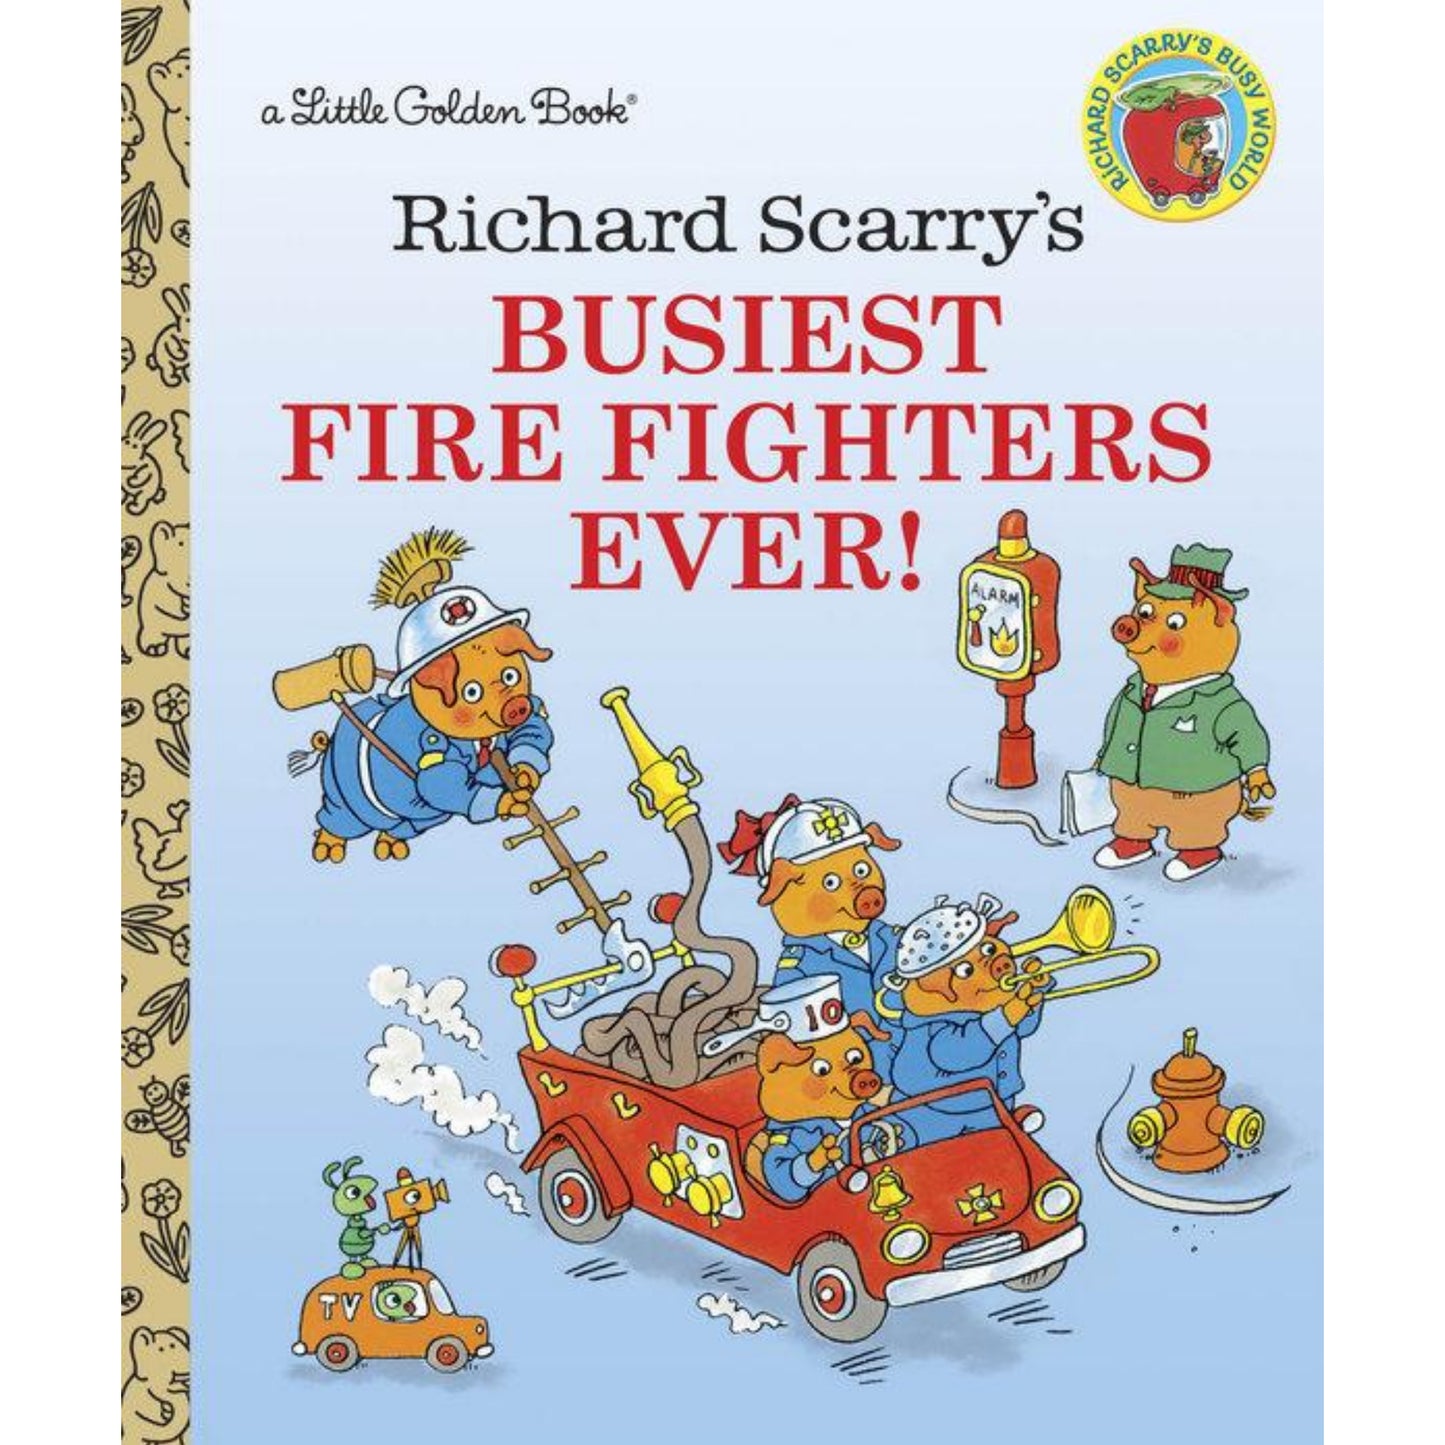 Busiest Fire Fighters Ever!